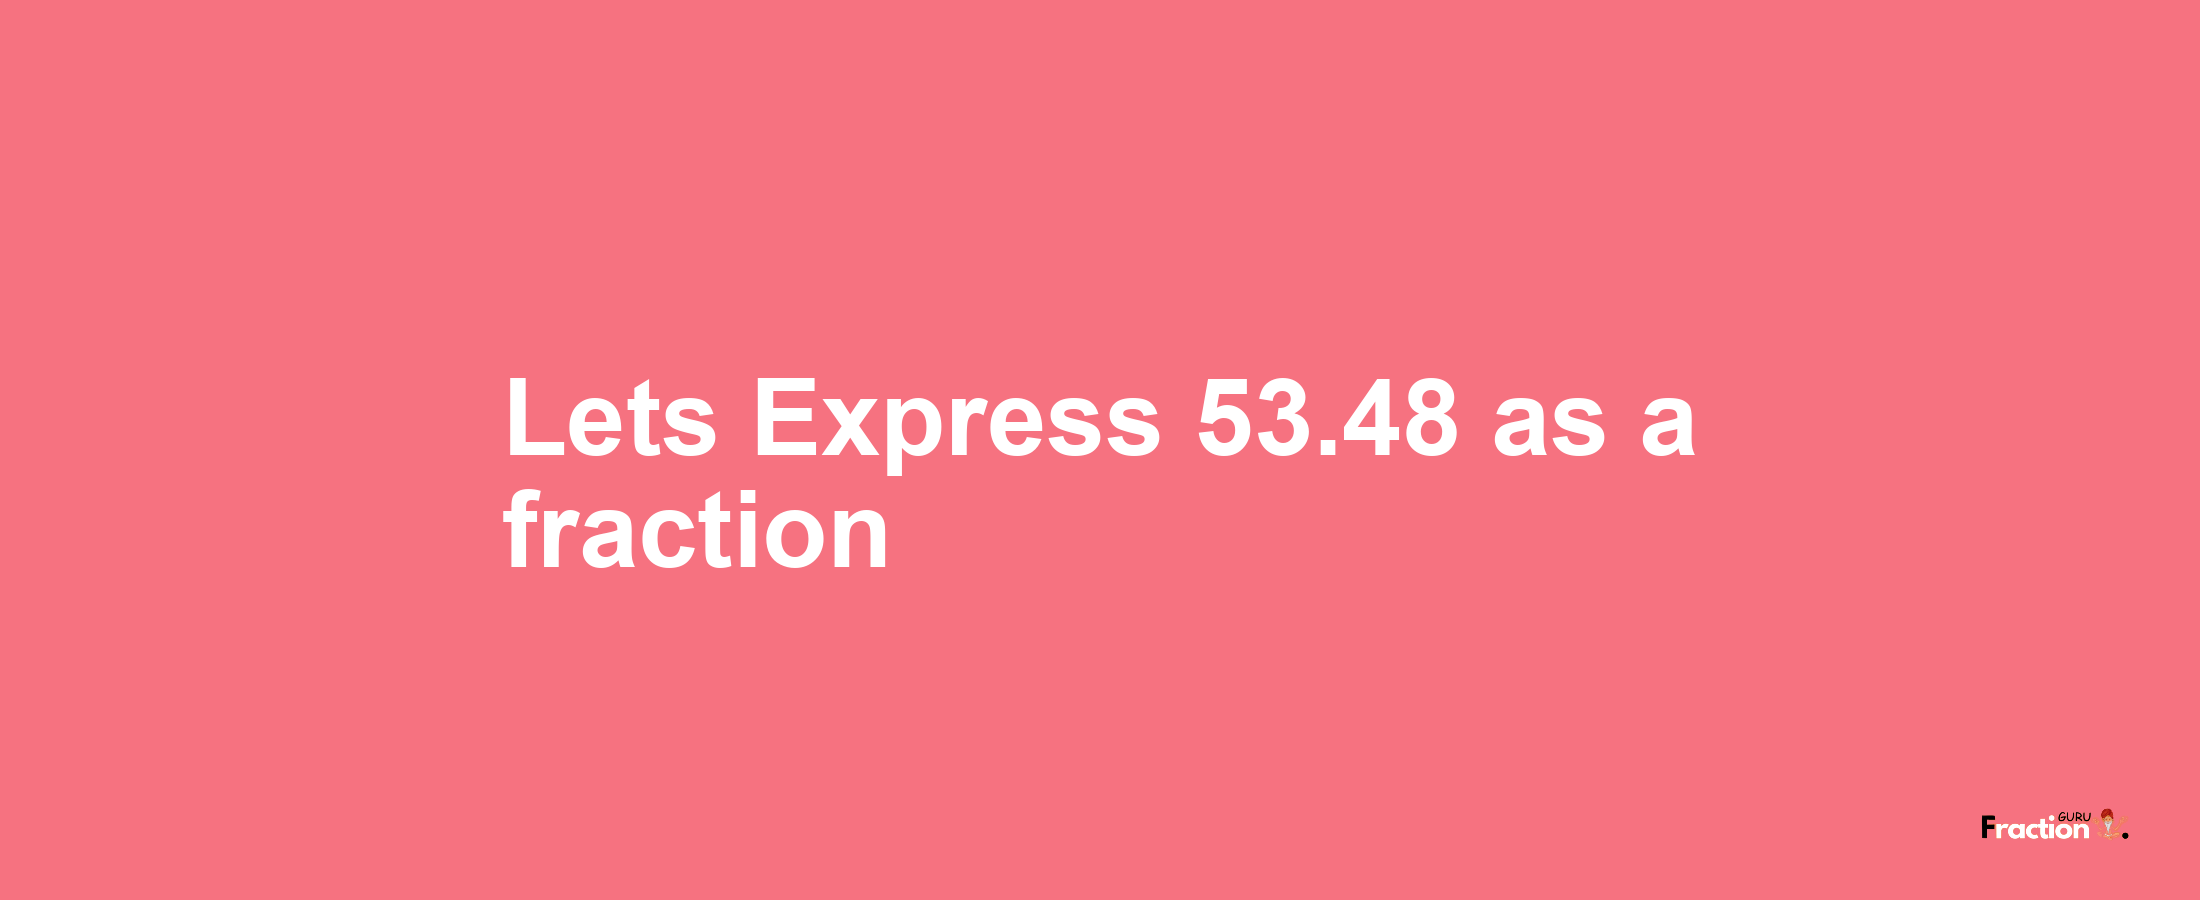 Lets Express 53.48 as afraction